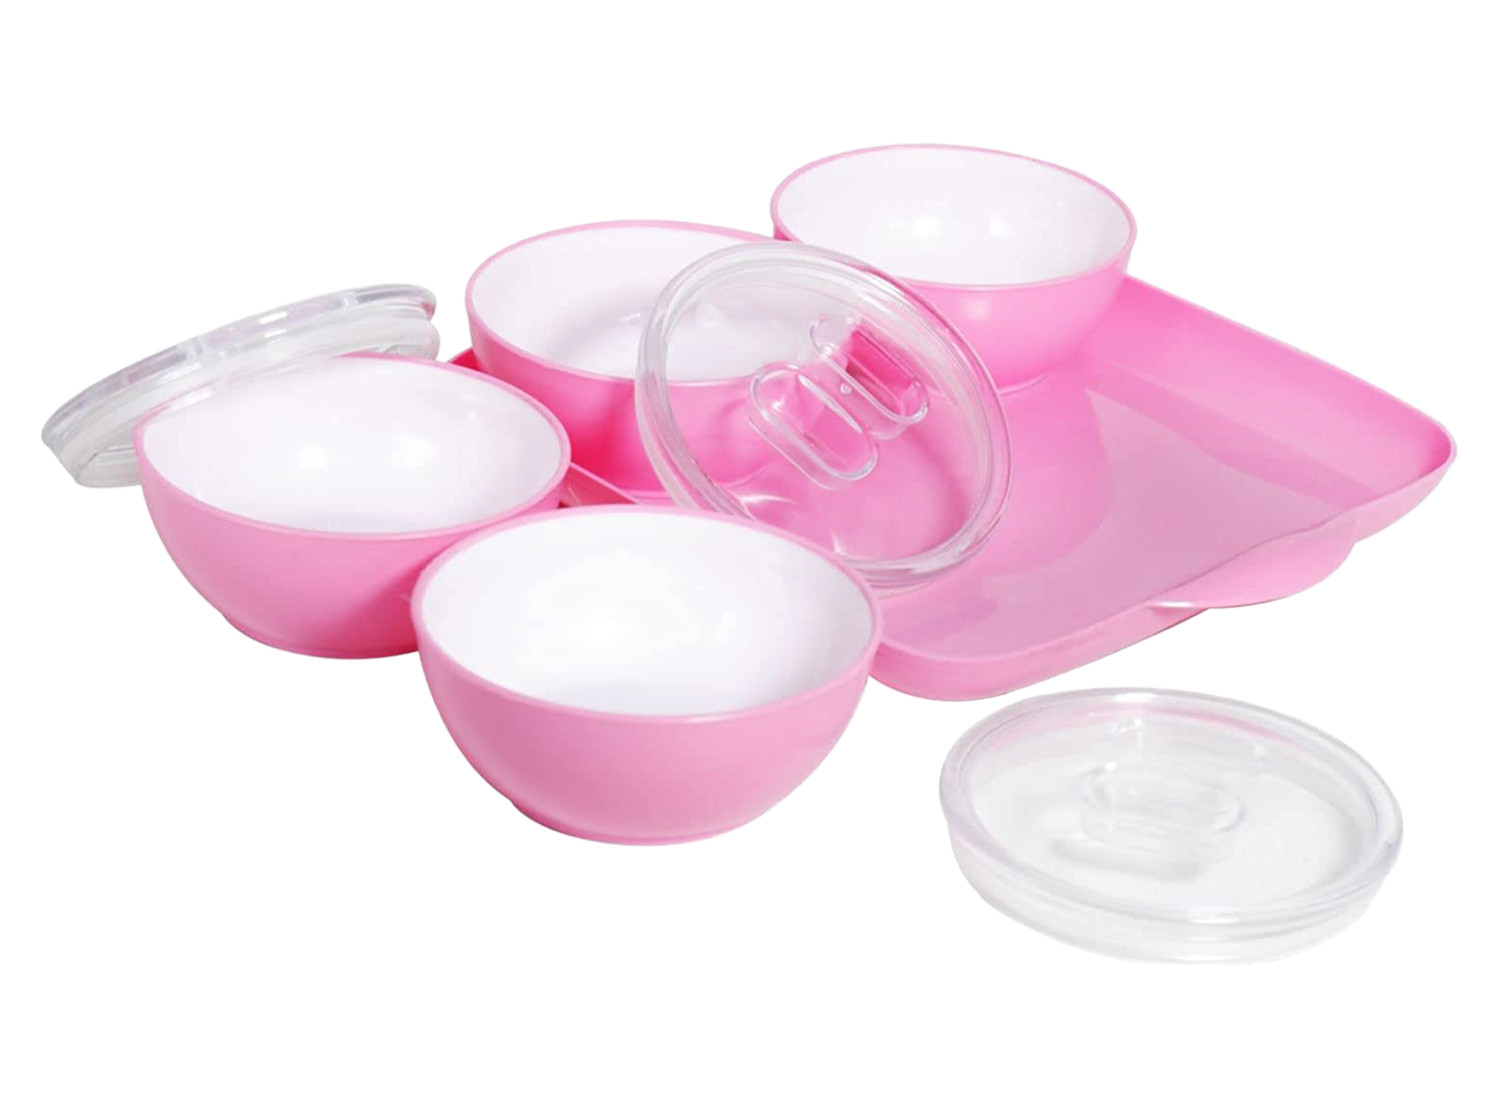 Kuber Industries Plastic 4 Bowls & 1 Square Tray Set For Serving & Store Dry Fruits, candies, Snacks With Silicon Rubberized Ring Lid (Pink)